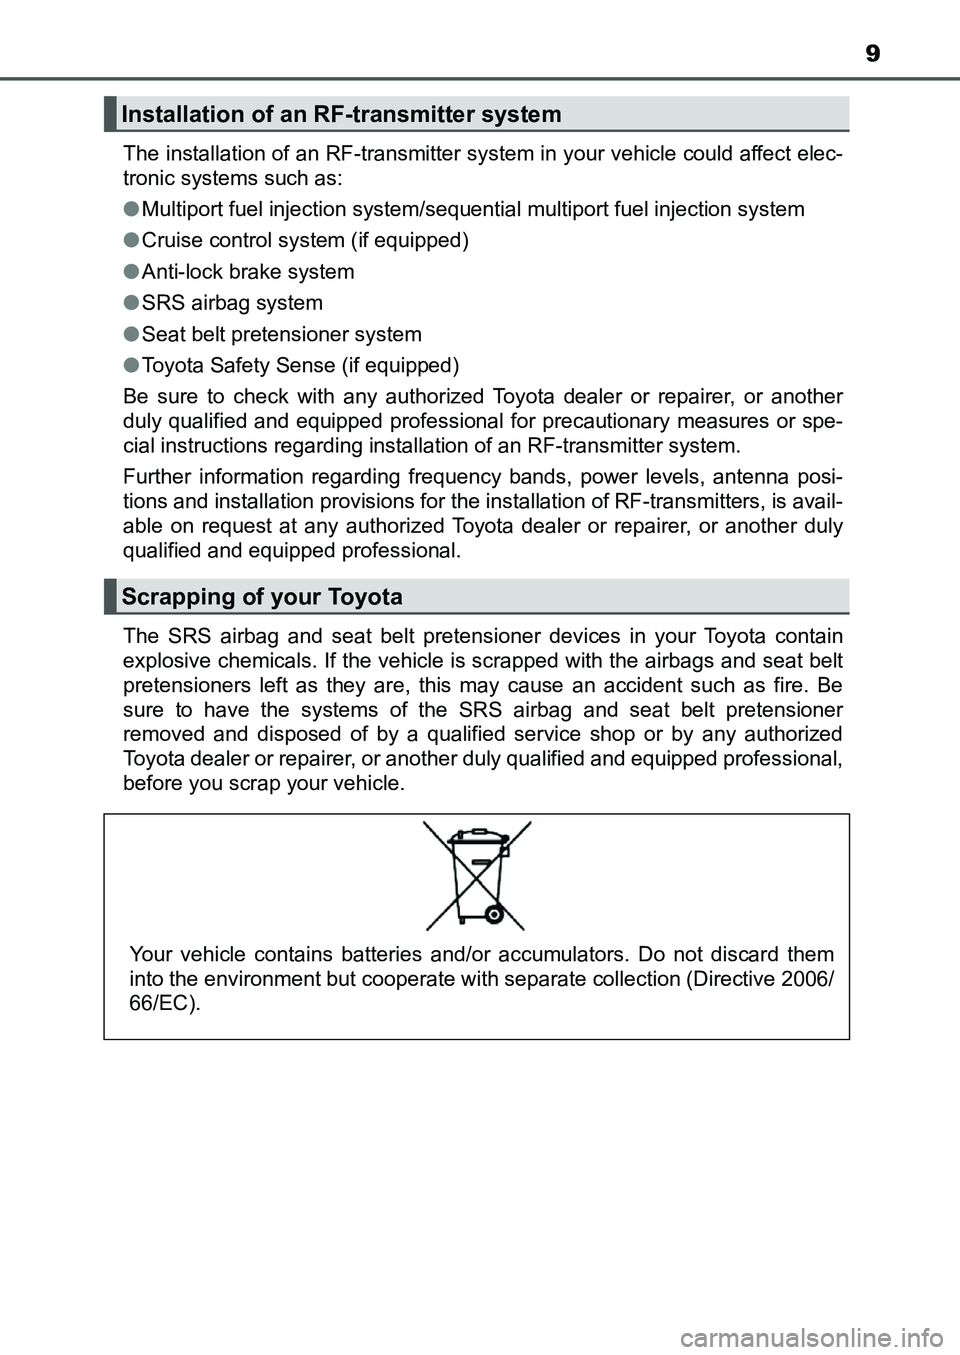 TOYOTA AURIS 2017  Owners Manual (in English) 9
UK AURIS_HB_EE  (OM12K97E)The installation of an RF-transmitter system in your vehicle could affect elec-
tronic systems such as:
●Multiport fuel injection system/sequential multiport fuel injecti